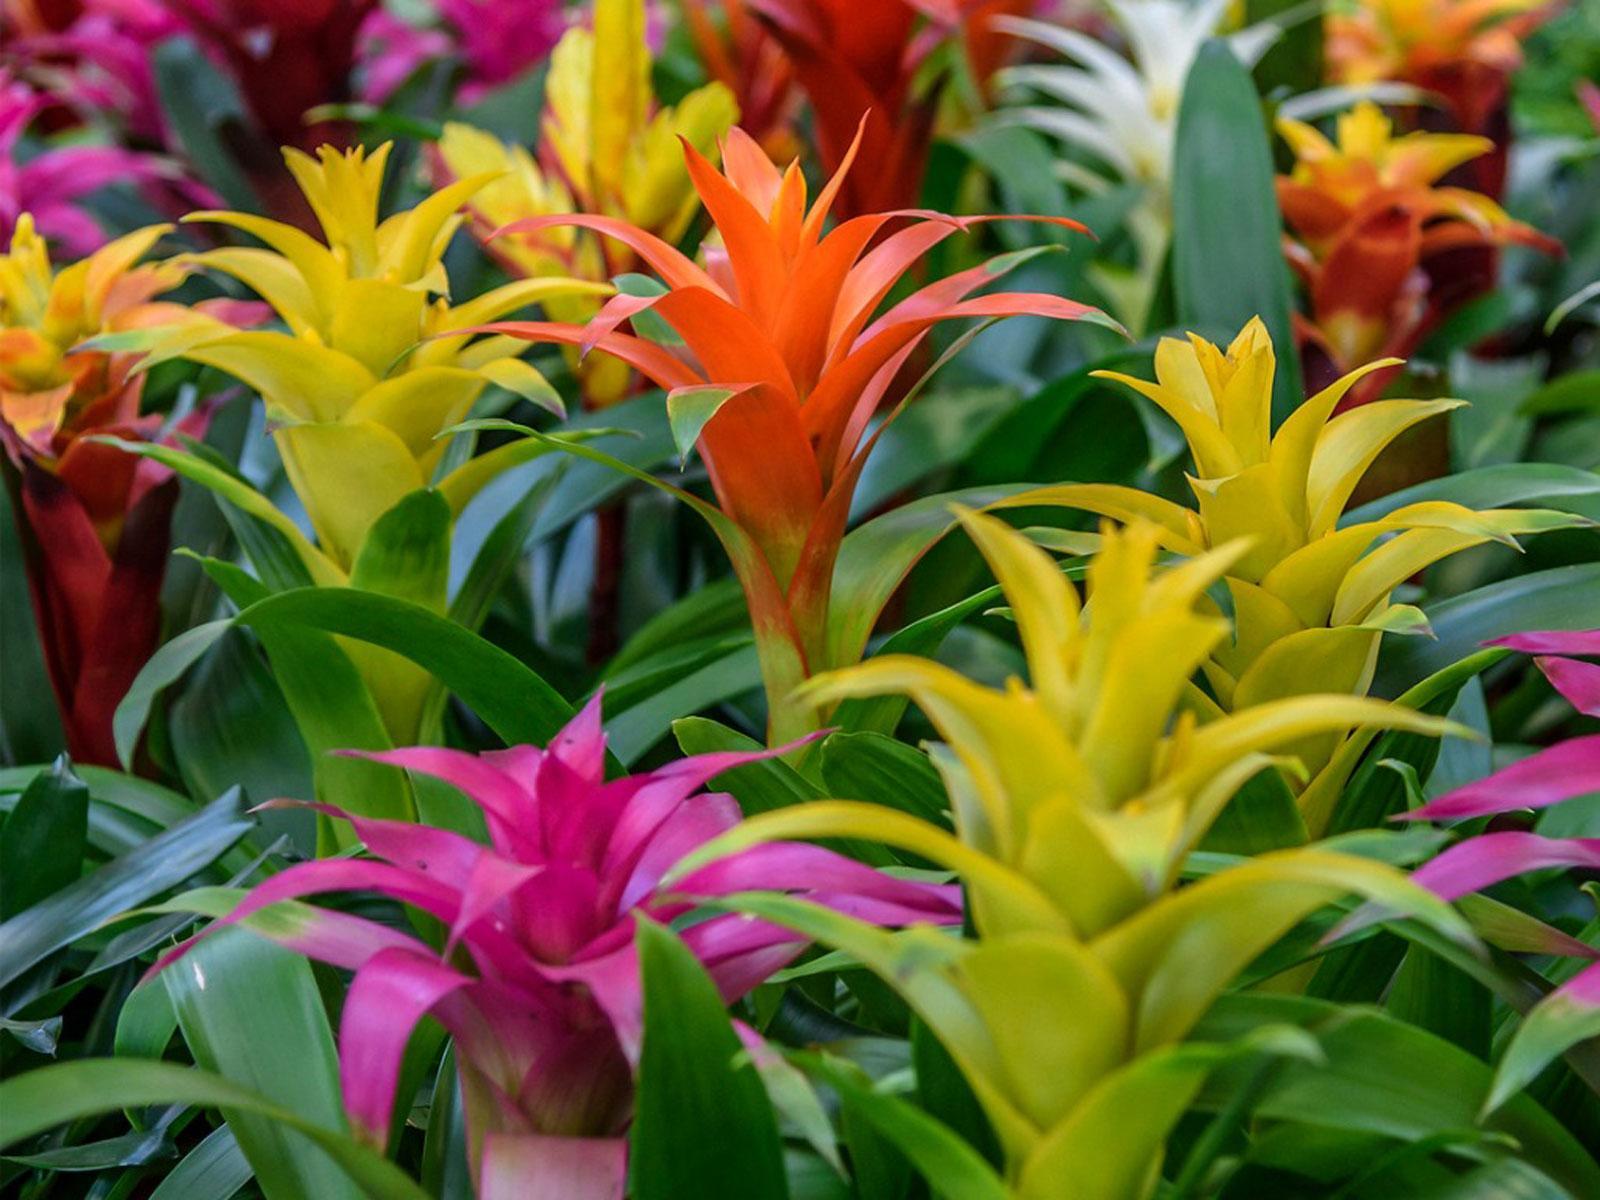 Bromeliad Plant Care: Growing And Caring For Bromeliad Plants